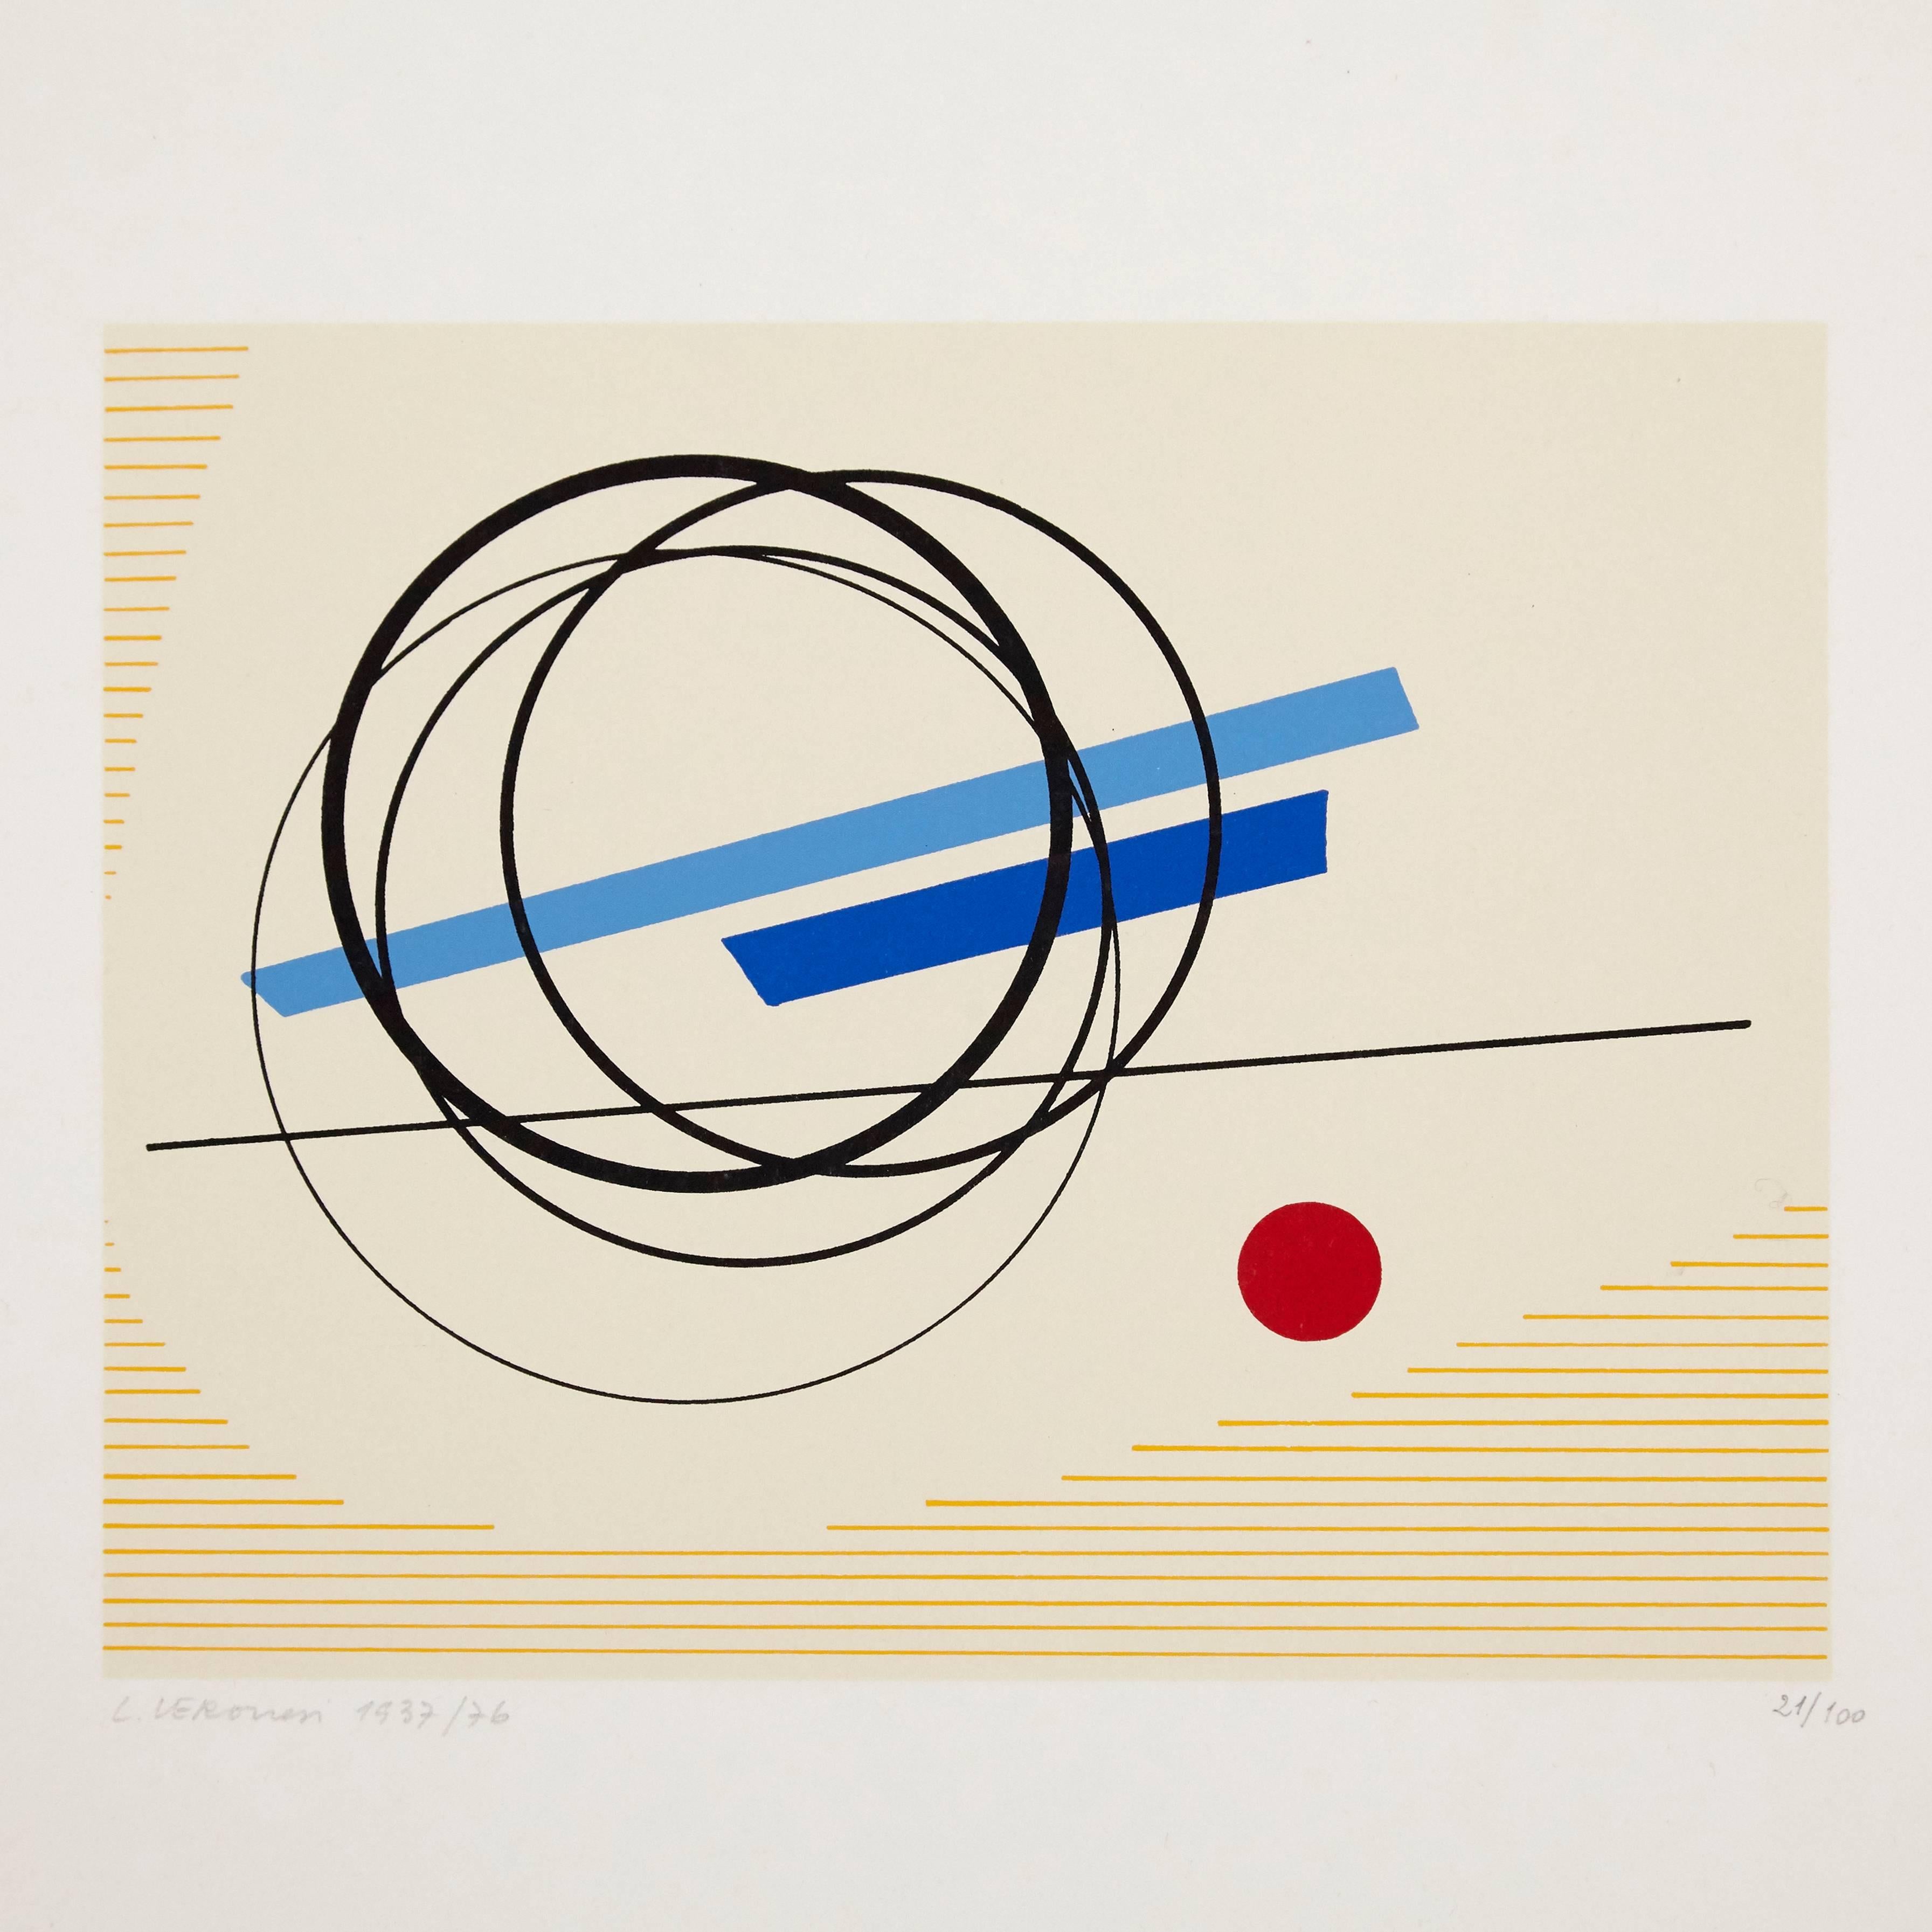 Untitled Serigraph made by Luigi Veronesi in 1976.

Signed by hand and numbered 21 / 100

In very good condition.

Measurements: 70 x 51 cm.